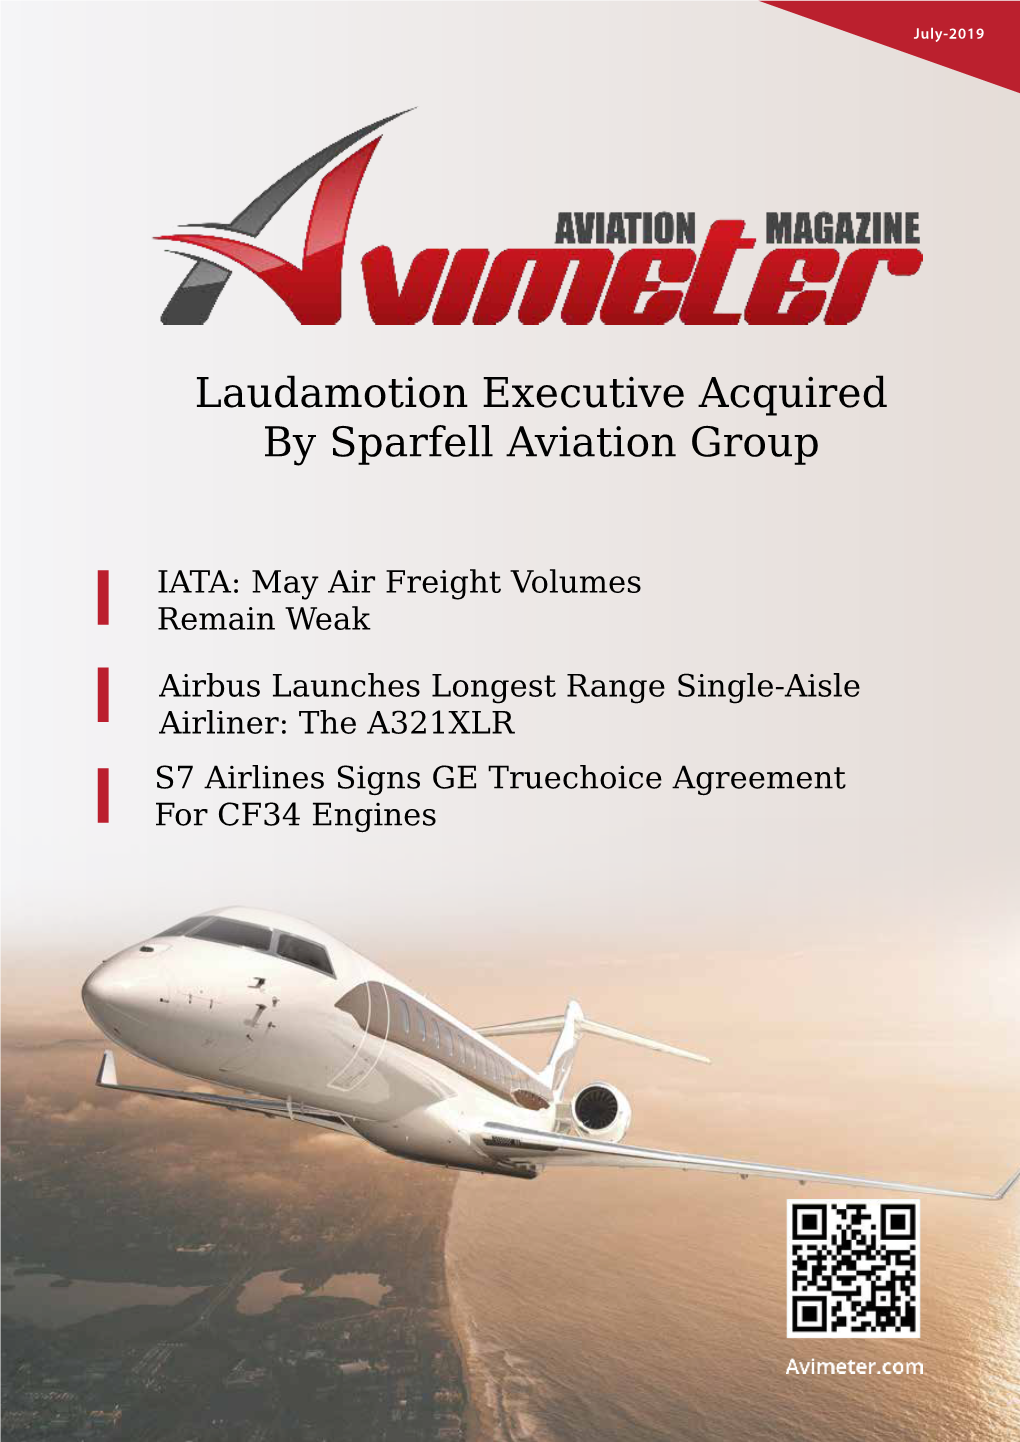 Laudamotion Executive Acquired by Sparfell Aviation Group